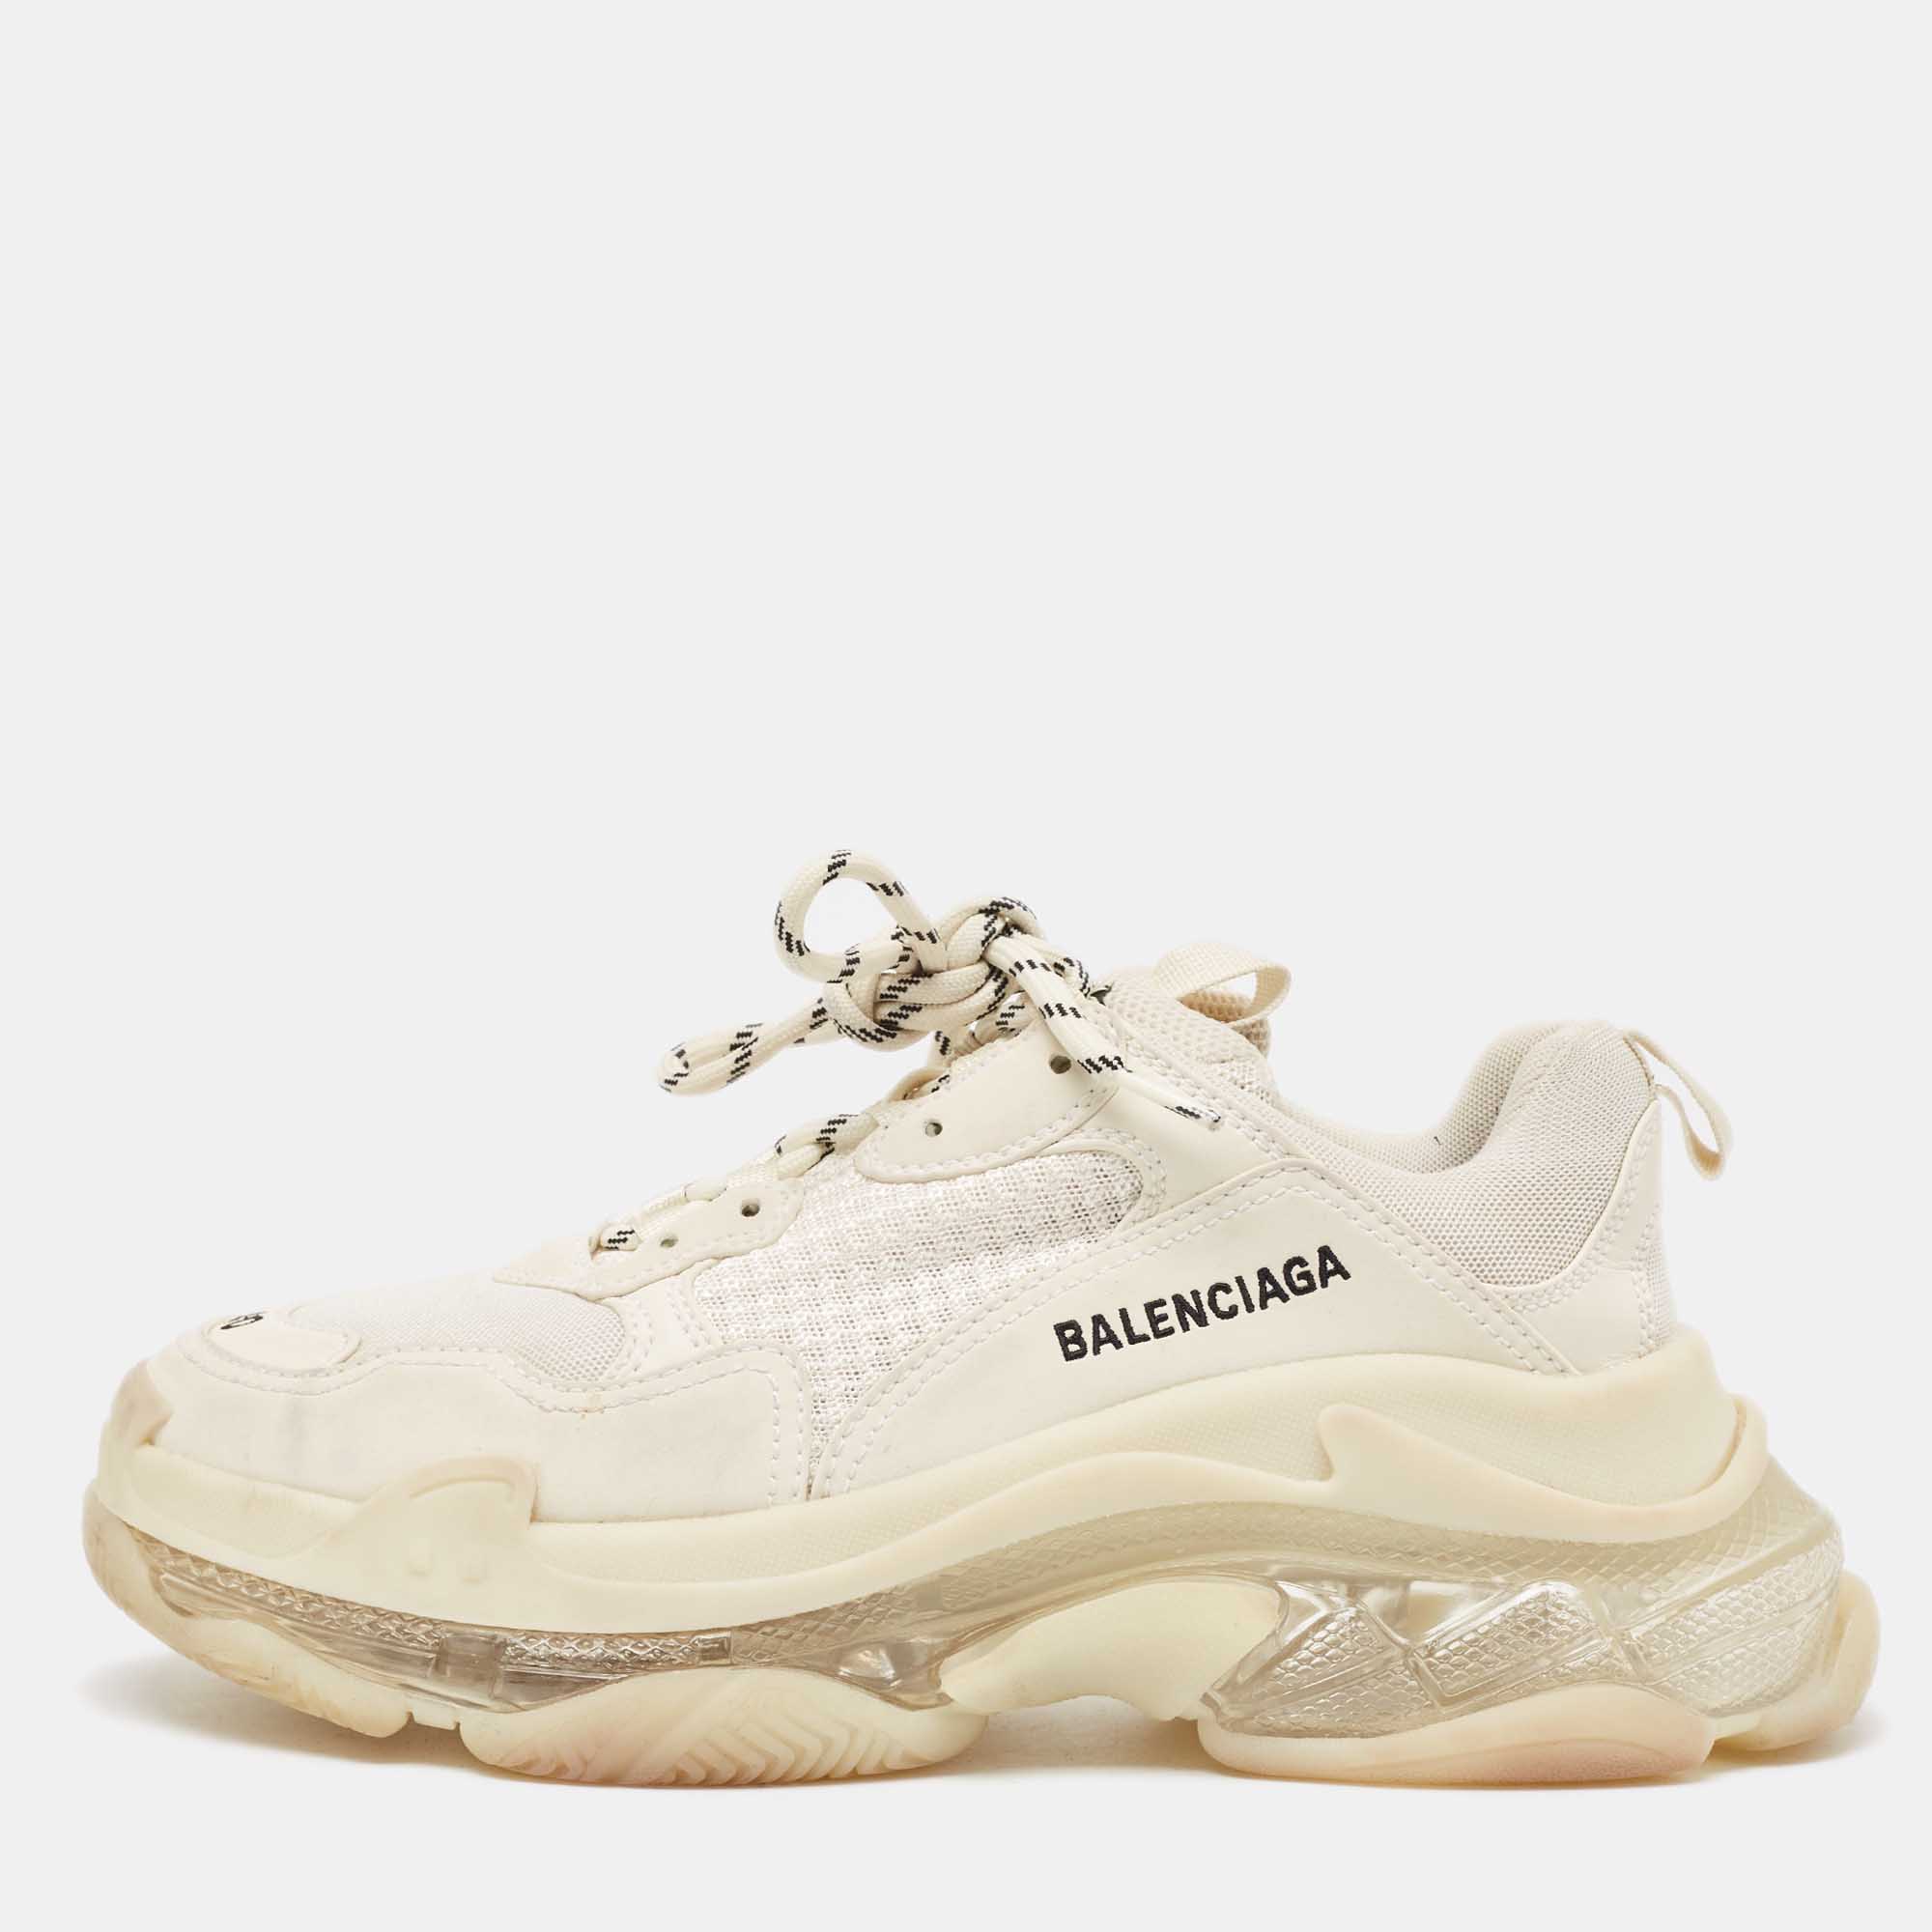 Balenciaga white/grey nubuck leather and  mesh triple s clear  sneakers size 40